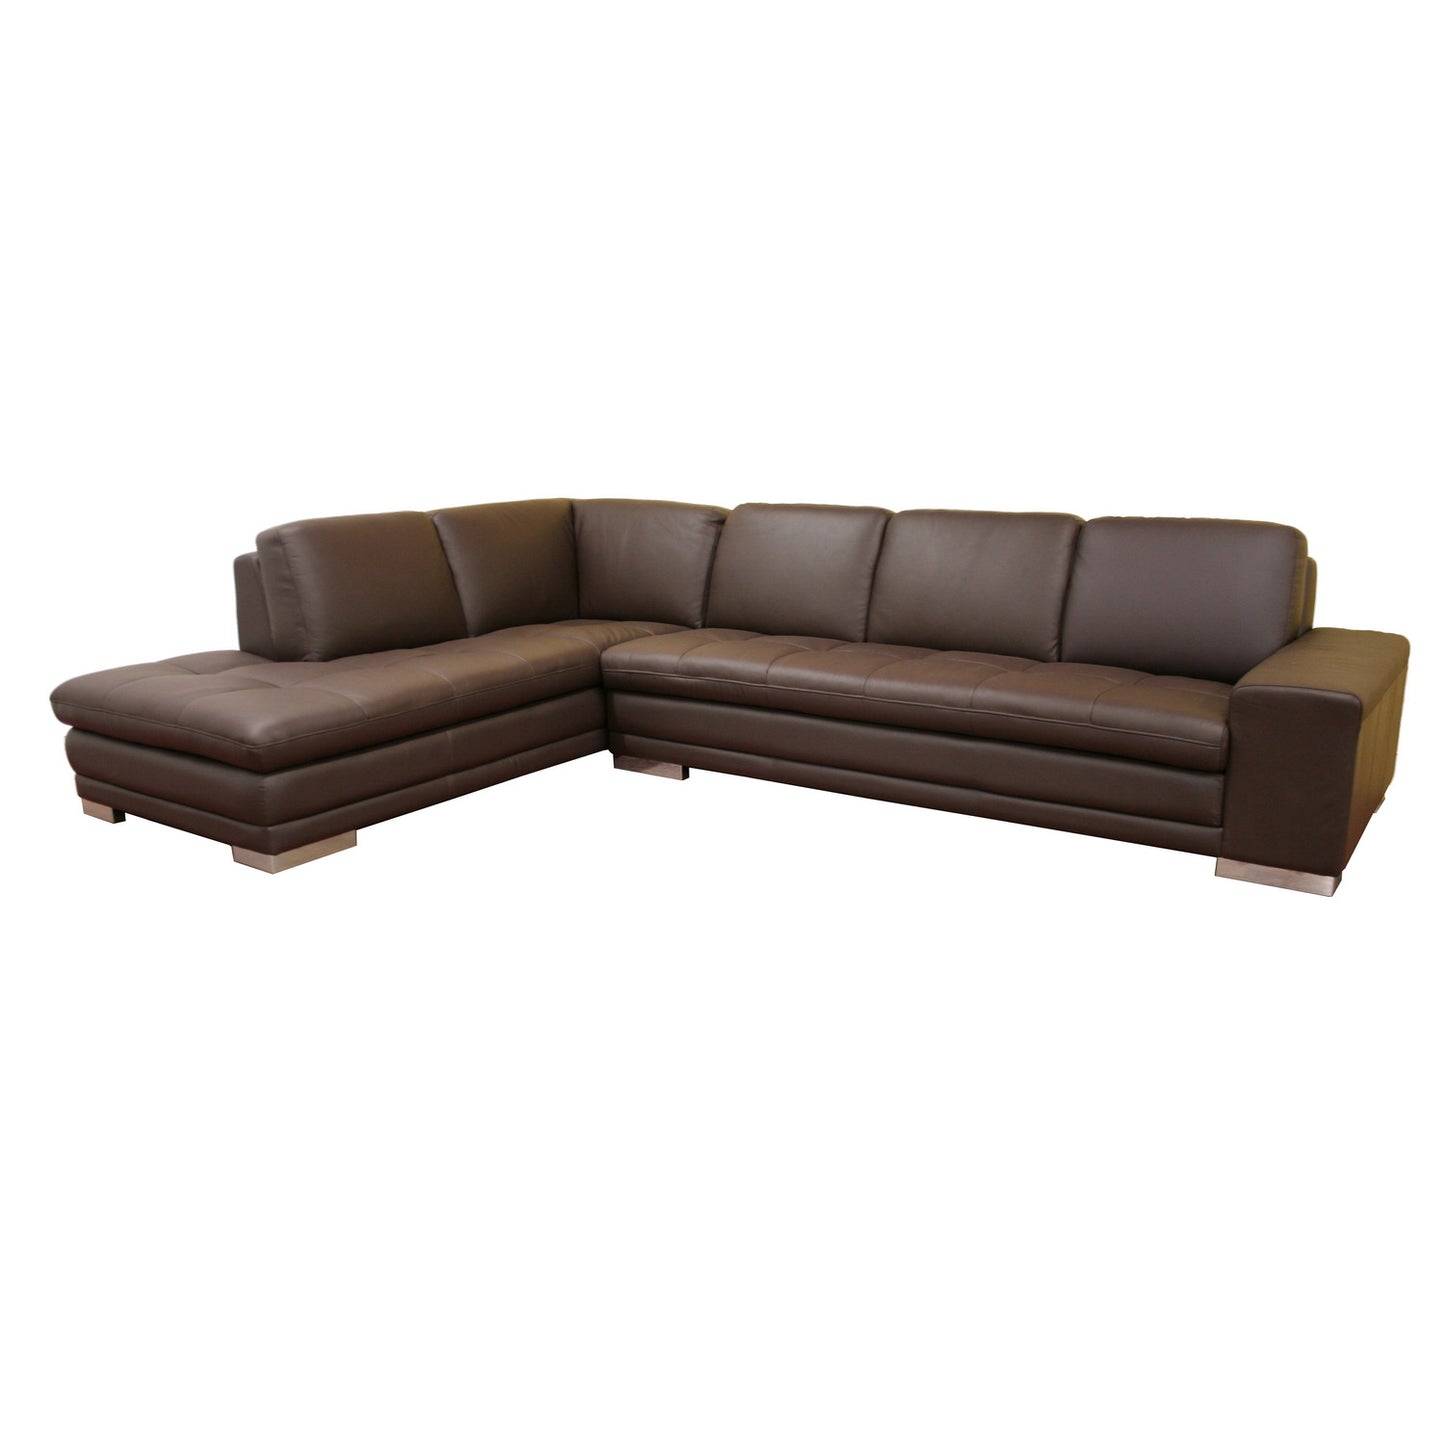 Contemporary Sectional Sofa in Dark Brown Leather - The Furniture Space.